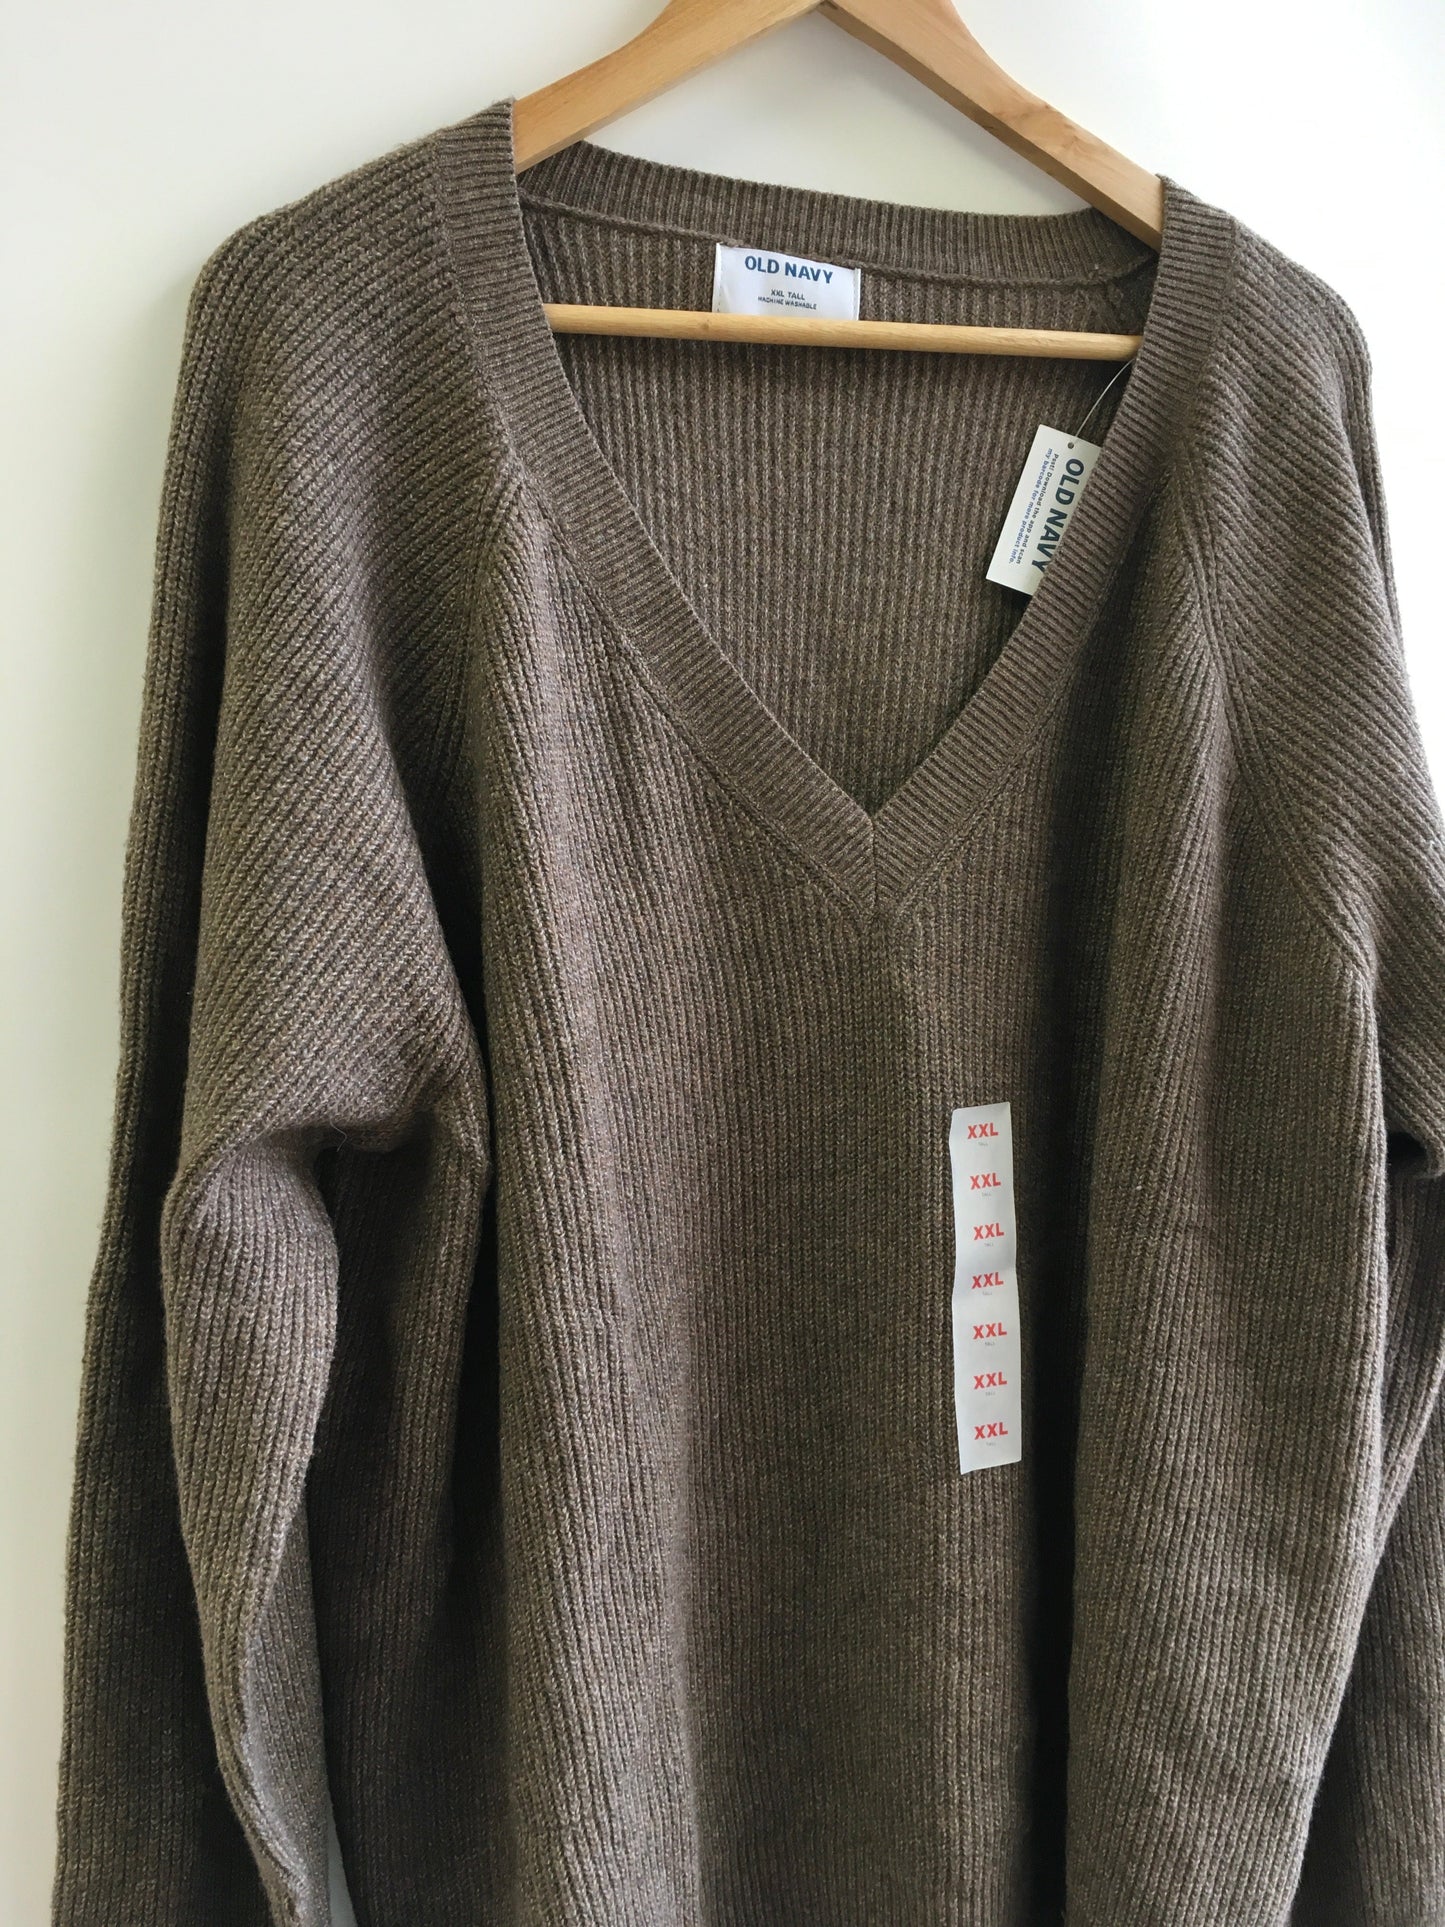 Sweater By Old Navy  Size: Xxl